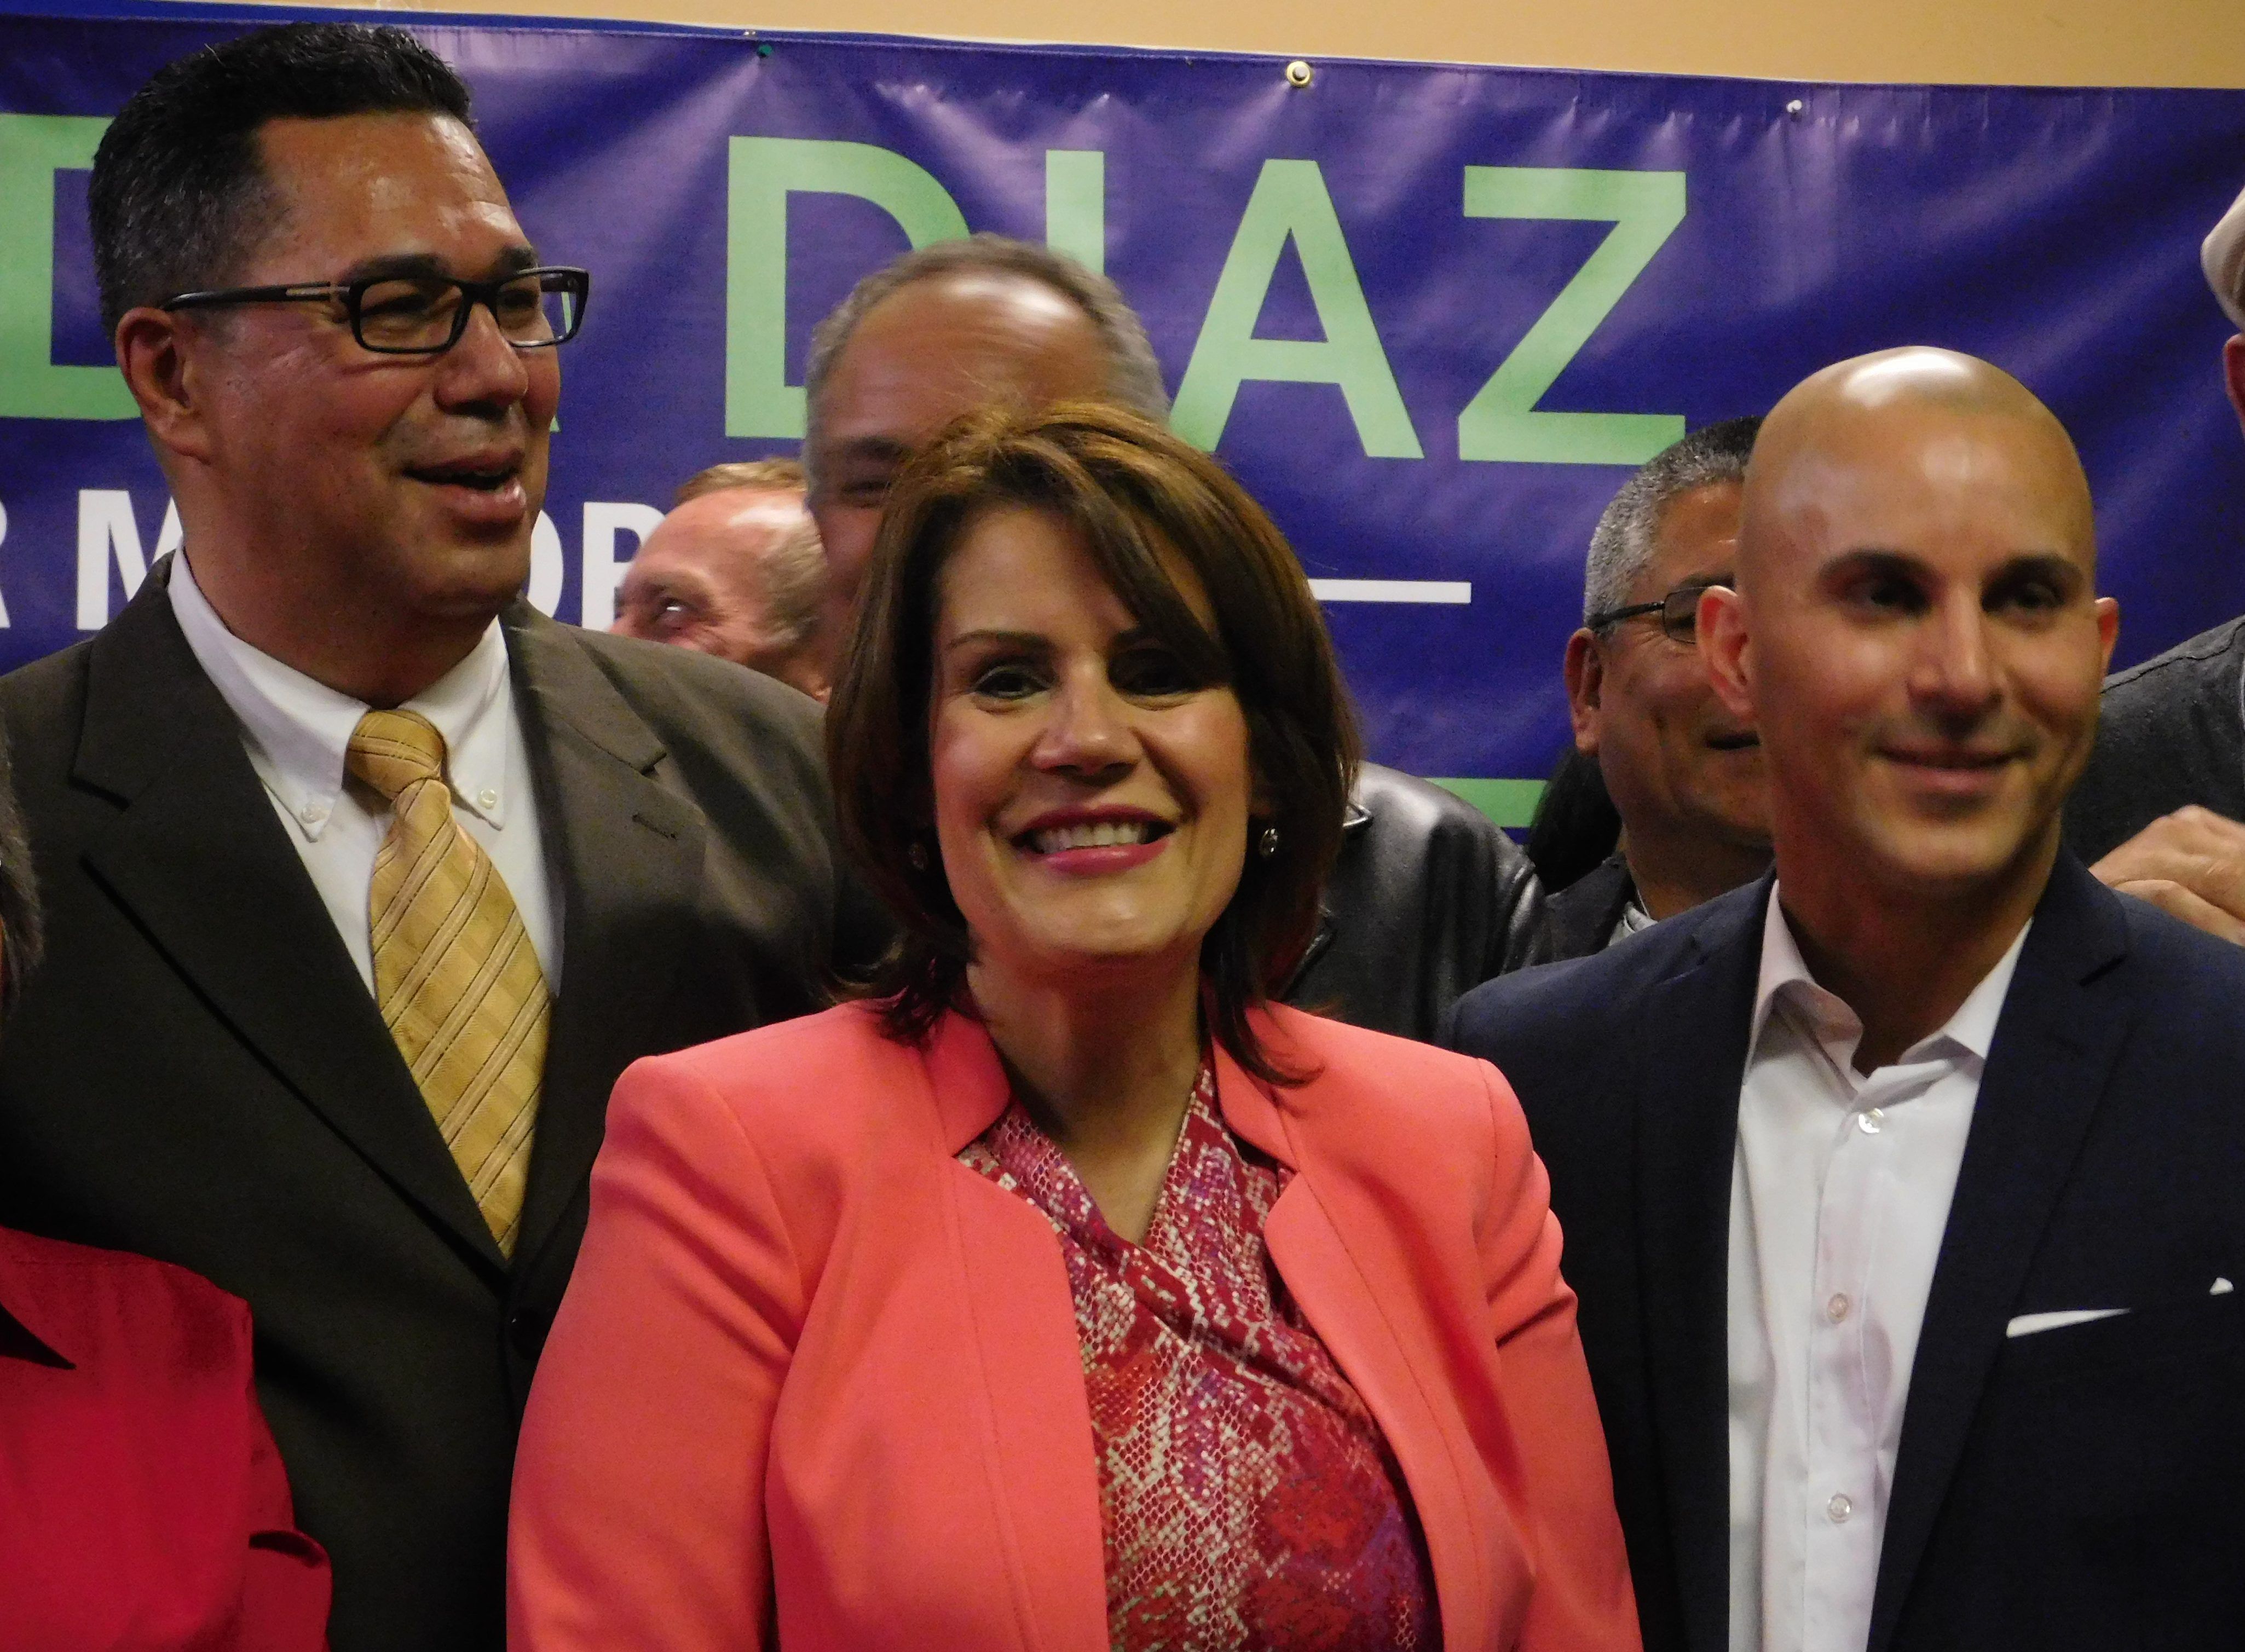 I Perth Amboy, Three Mayoral Challengers to Face Diaz